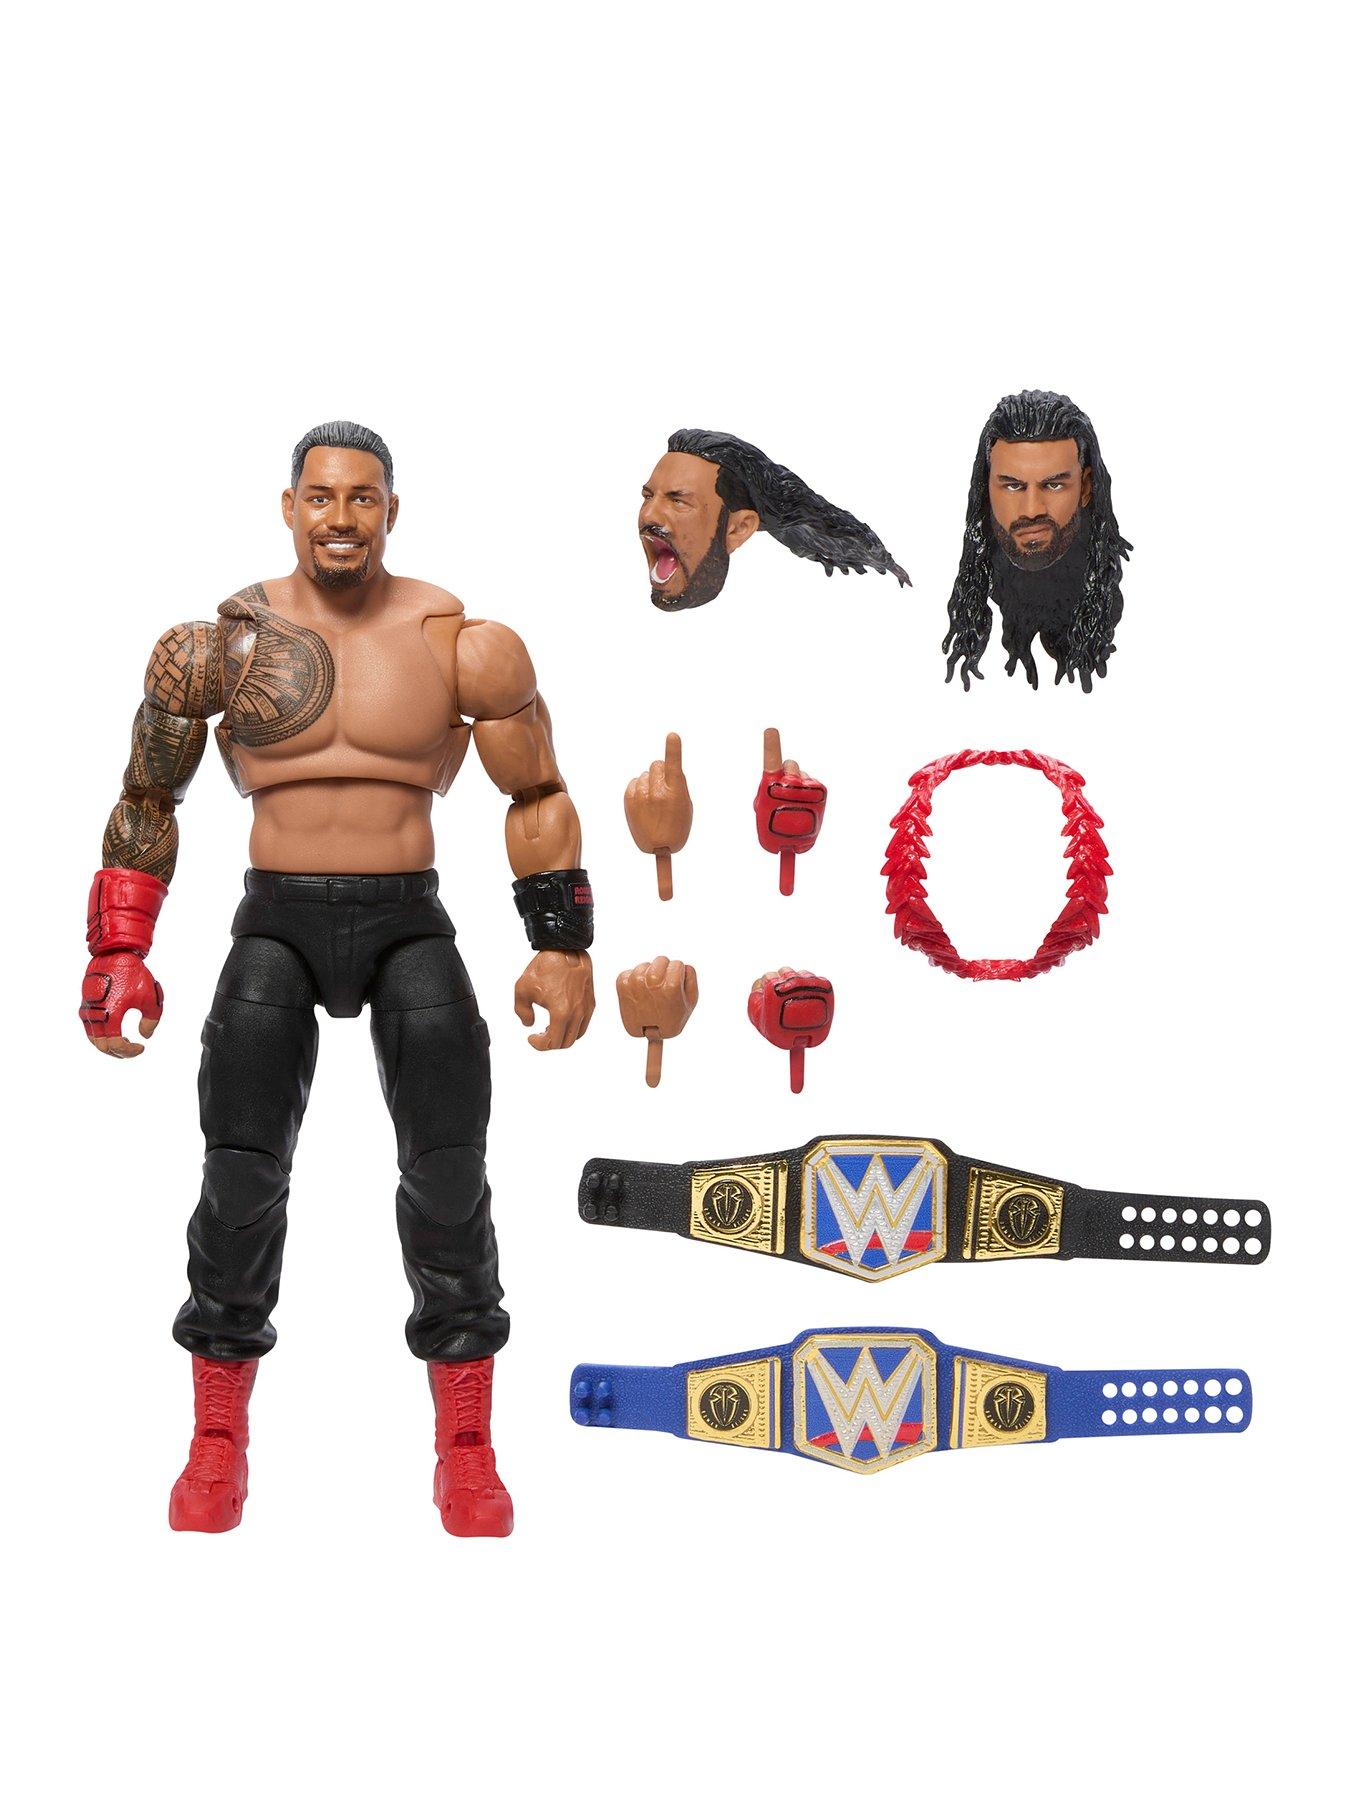 Ultimate Edition Action Figure - Roman Reigns